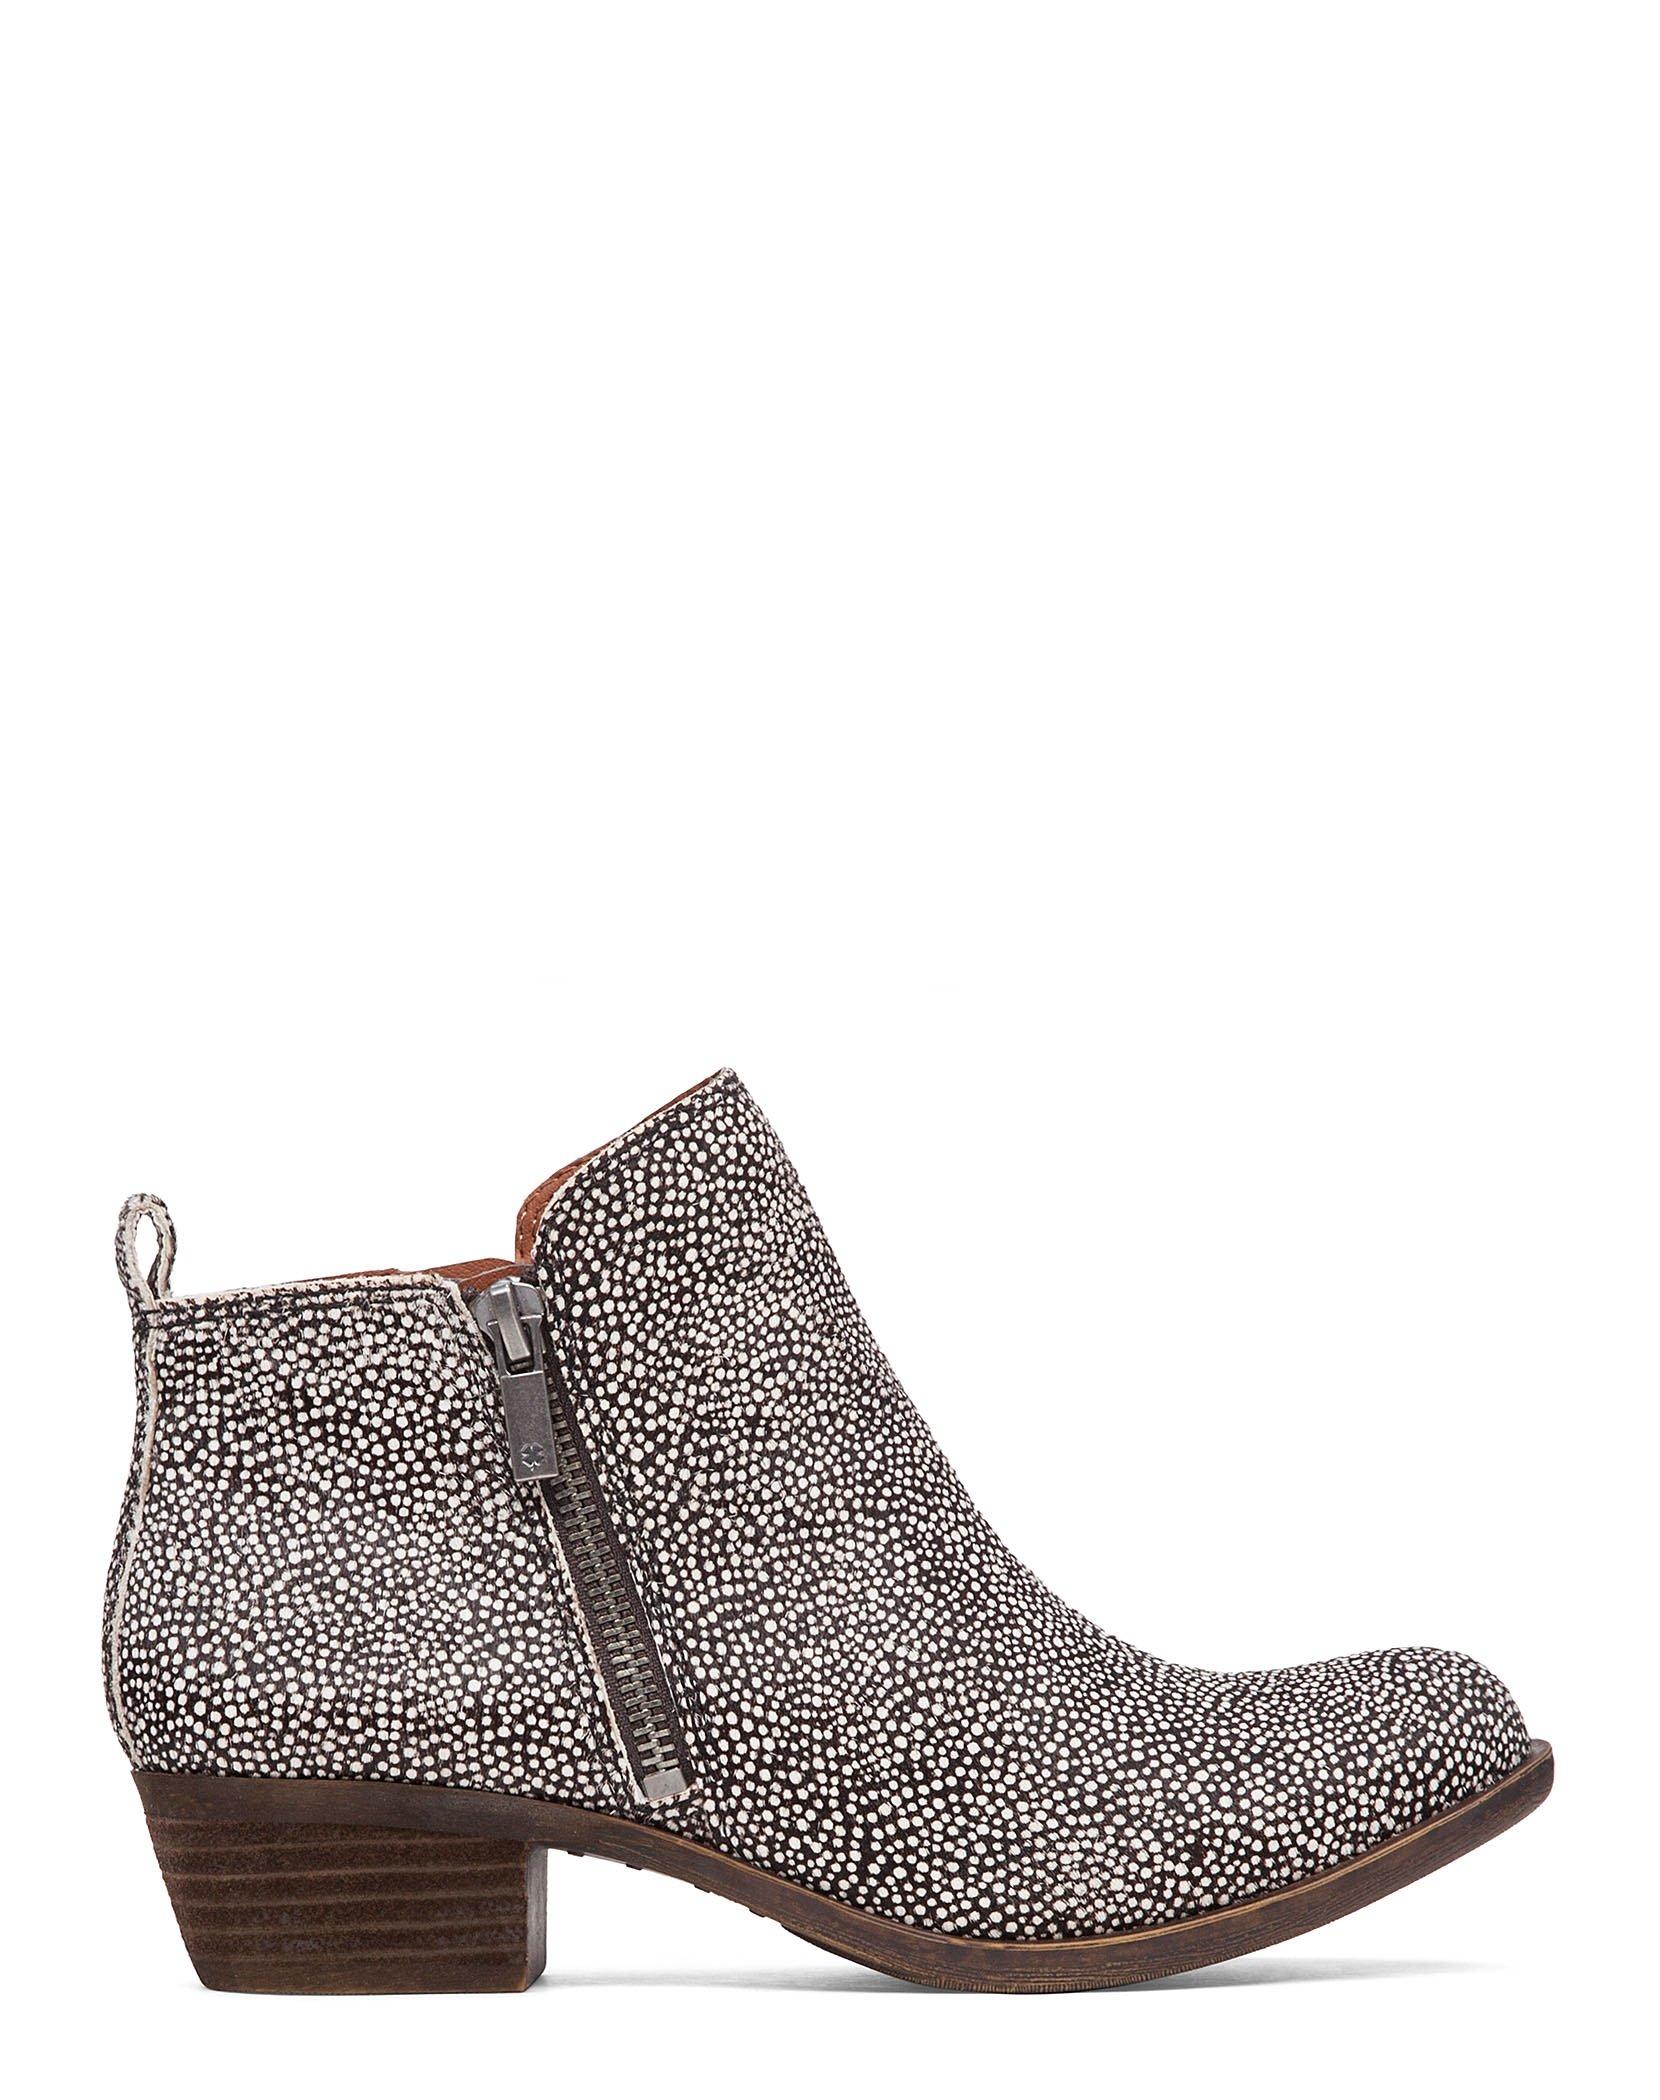 lucky brand brindle bootie